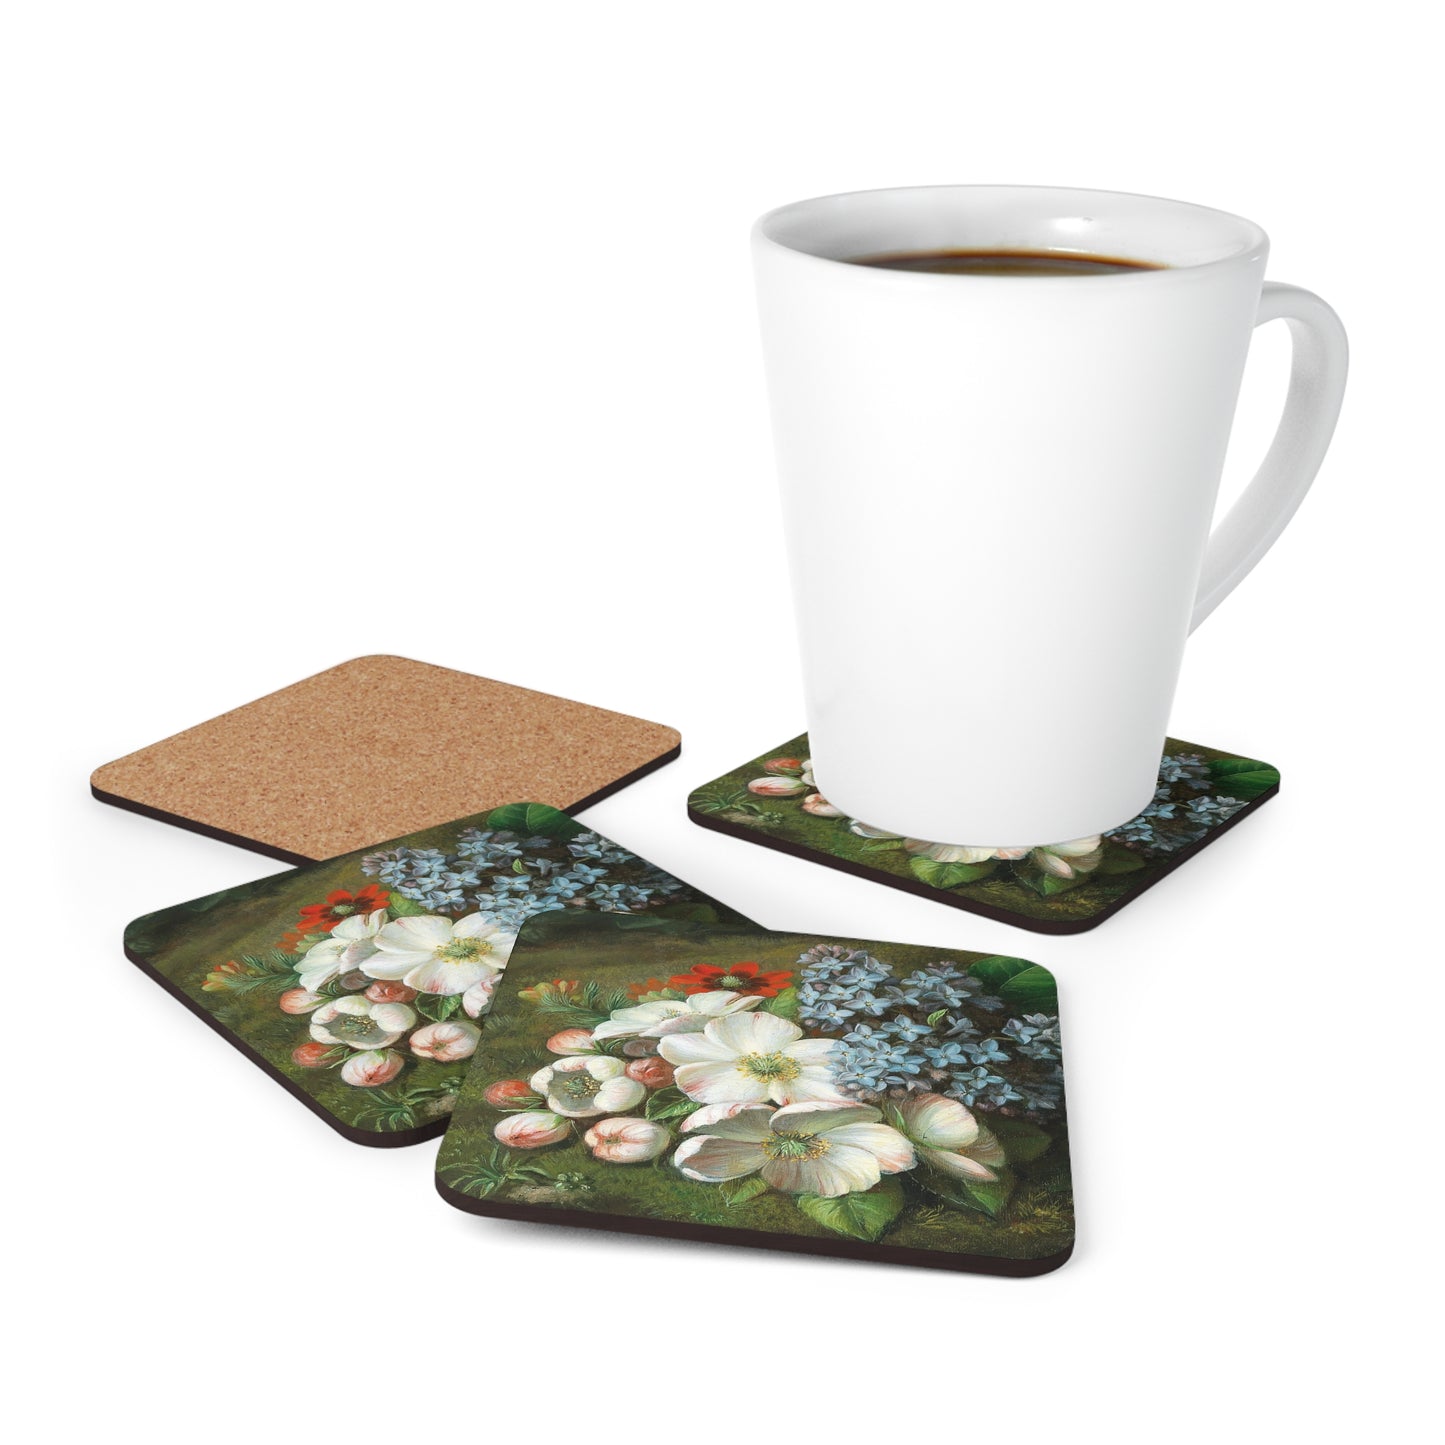 VINCENT LOOS - APPLE BLOSSOM WITH LILACS AND SUMMER ADONIS - COASTER SET